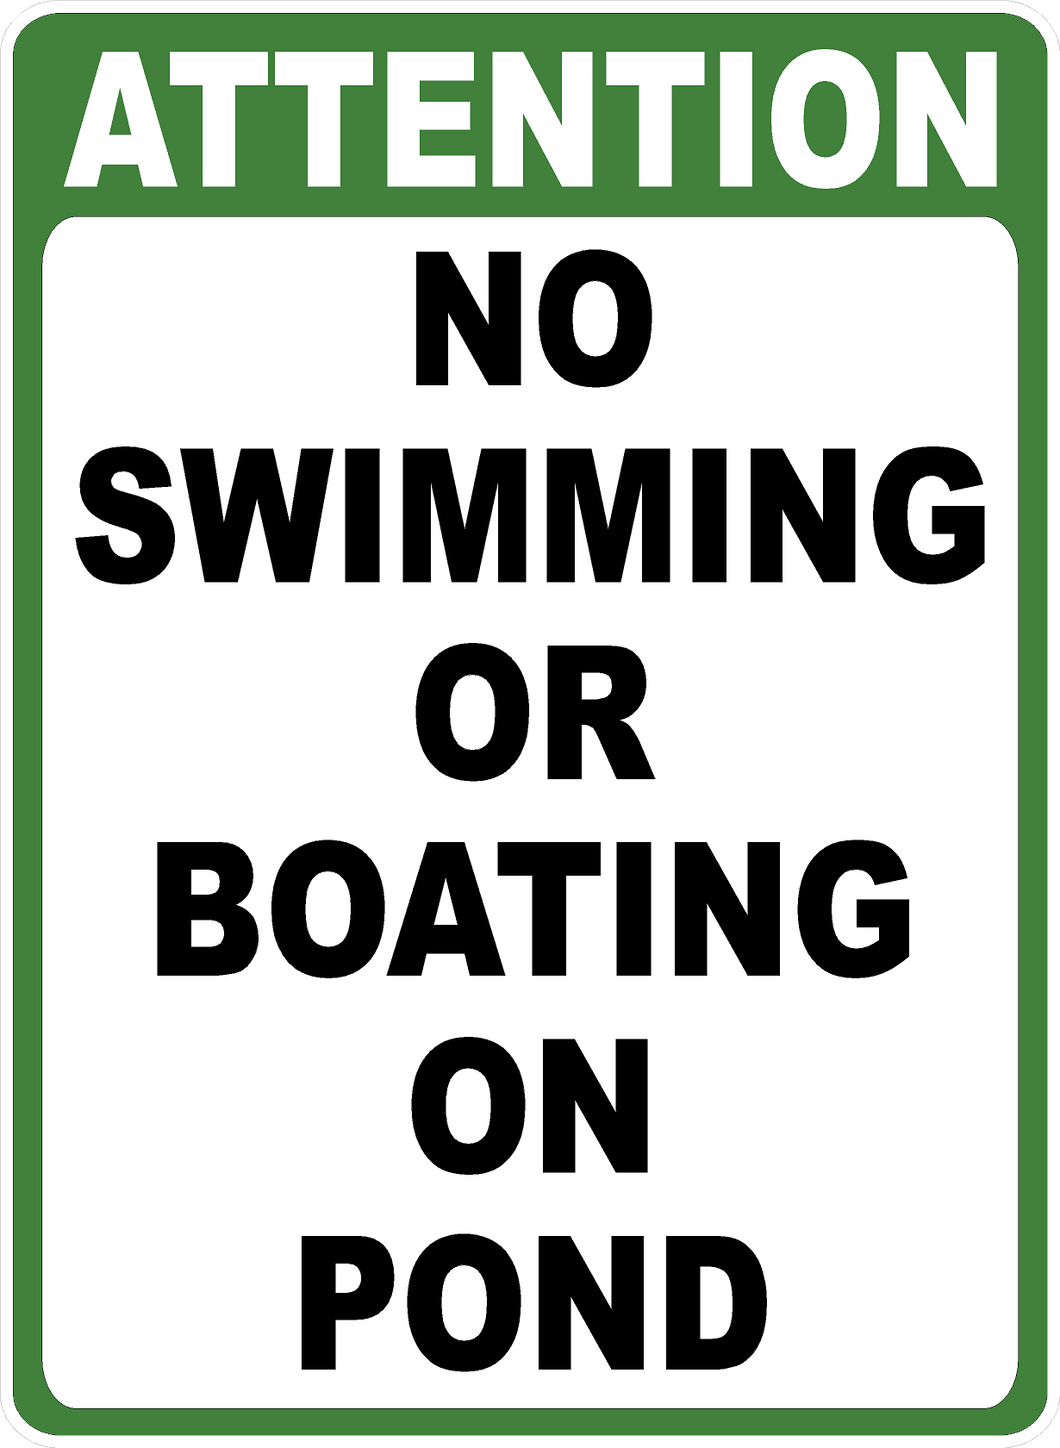 Attention No Swimming or Boating on Pond Sign